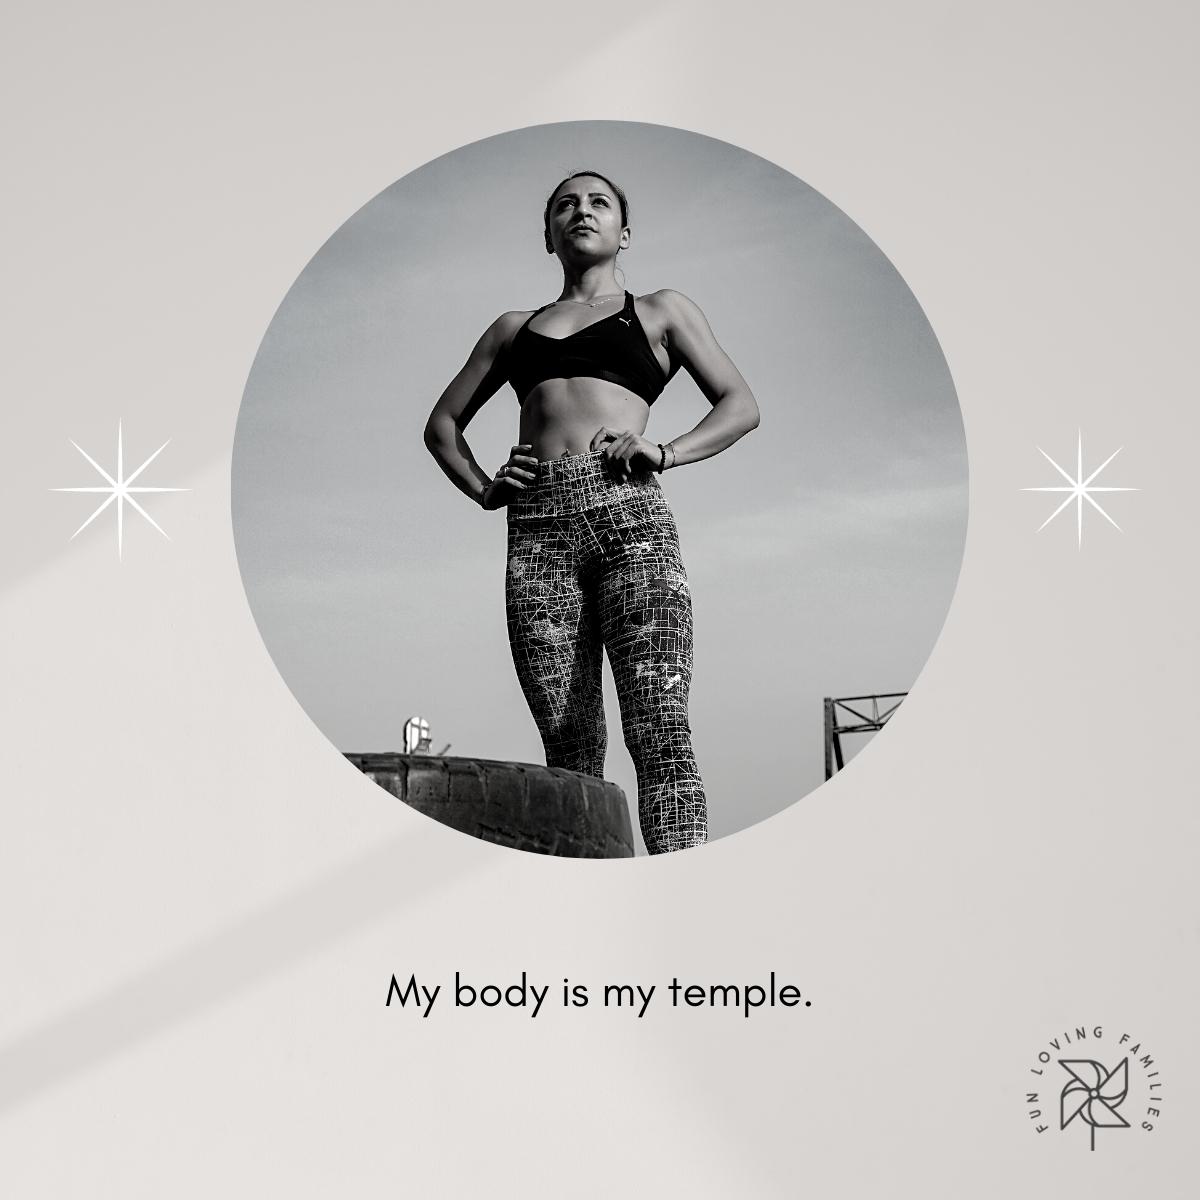 My body is my temple affirmation